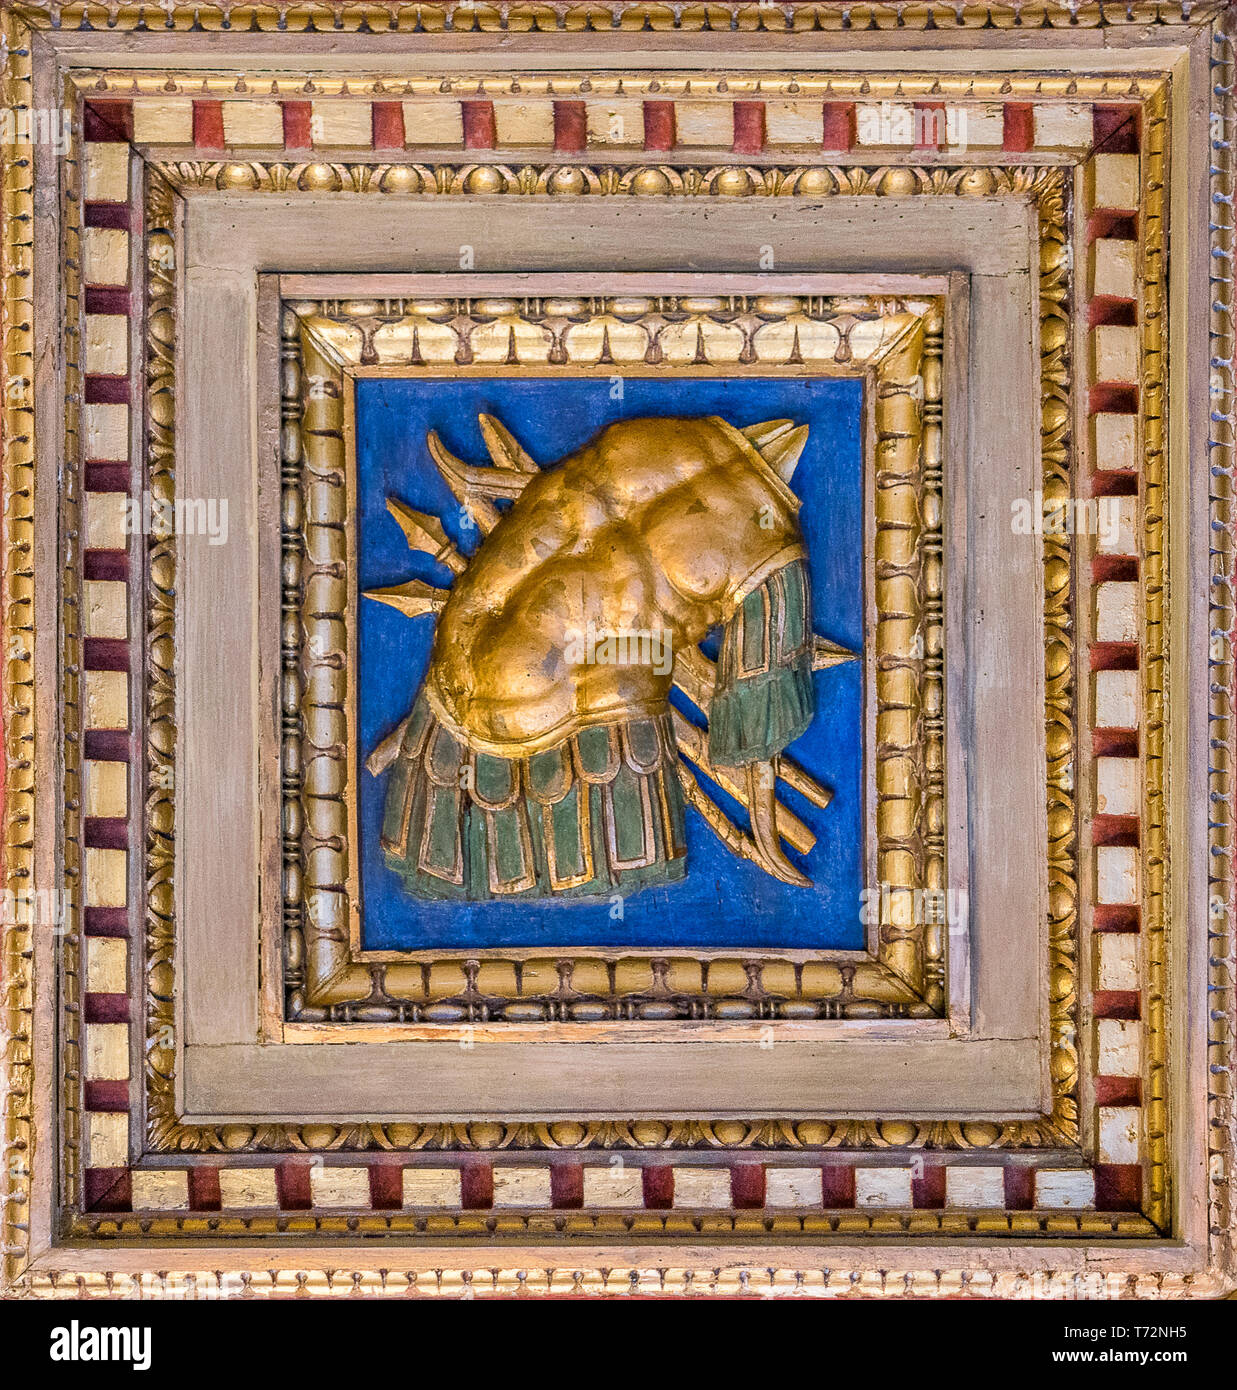 Wooden decorations in the ceiling of the Capitoline Museums in Rome, Italy Stock Photo